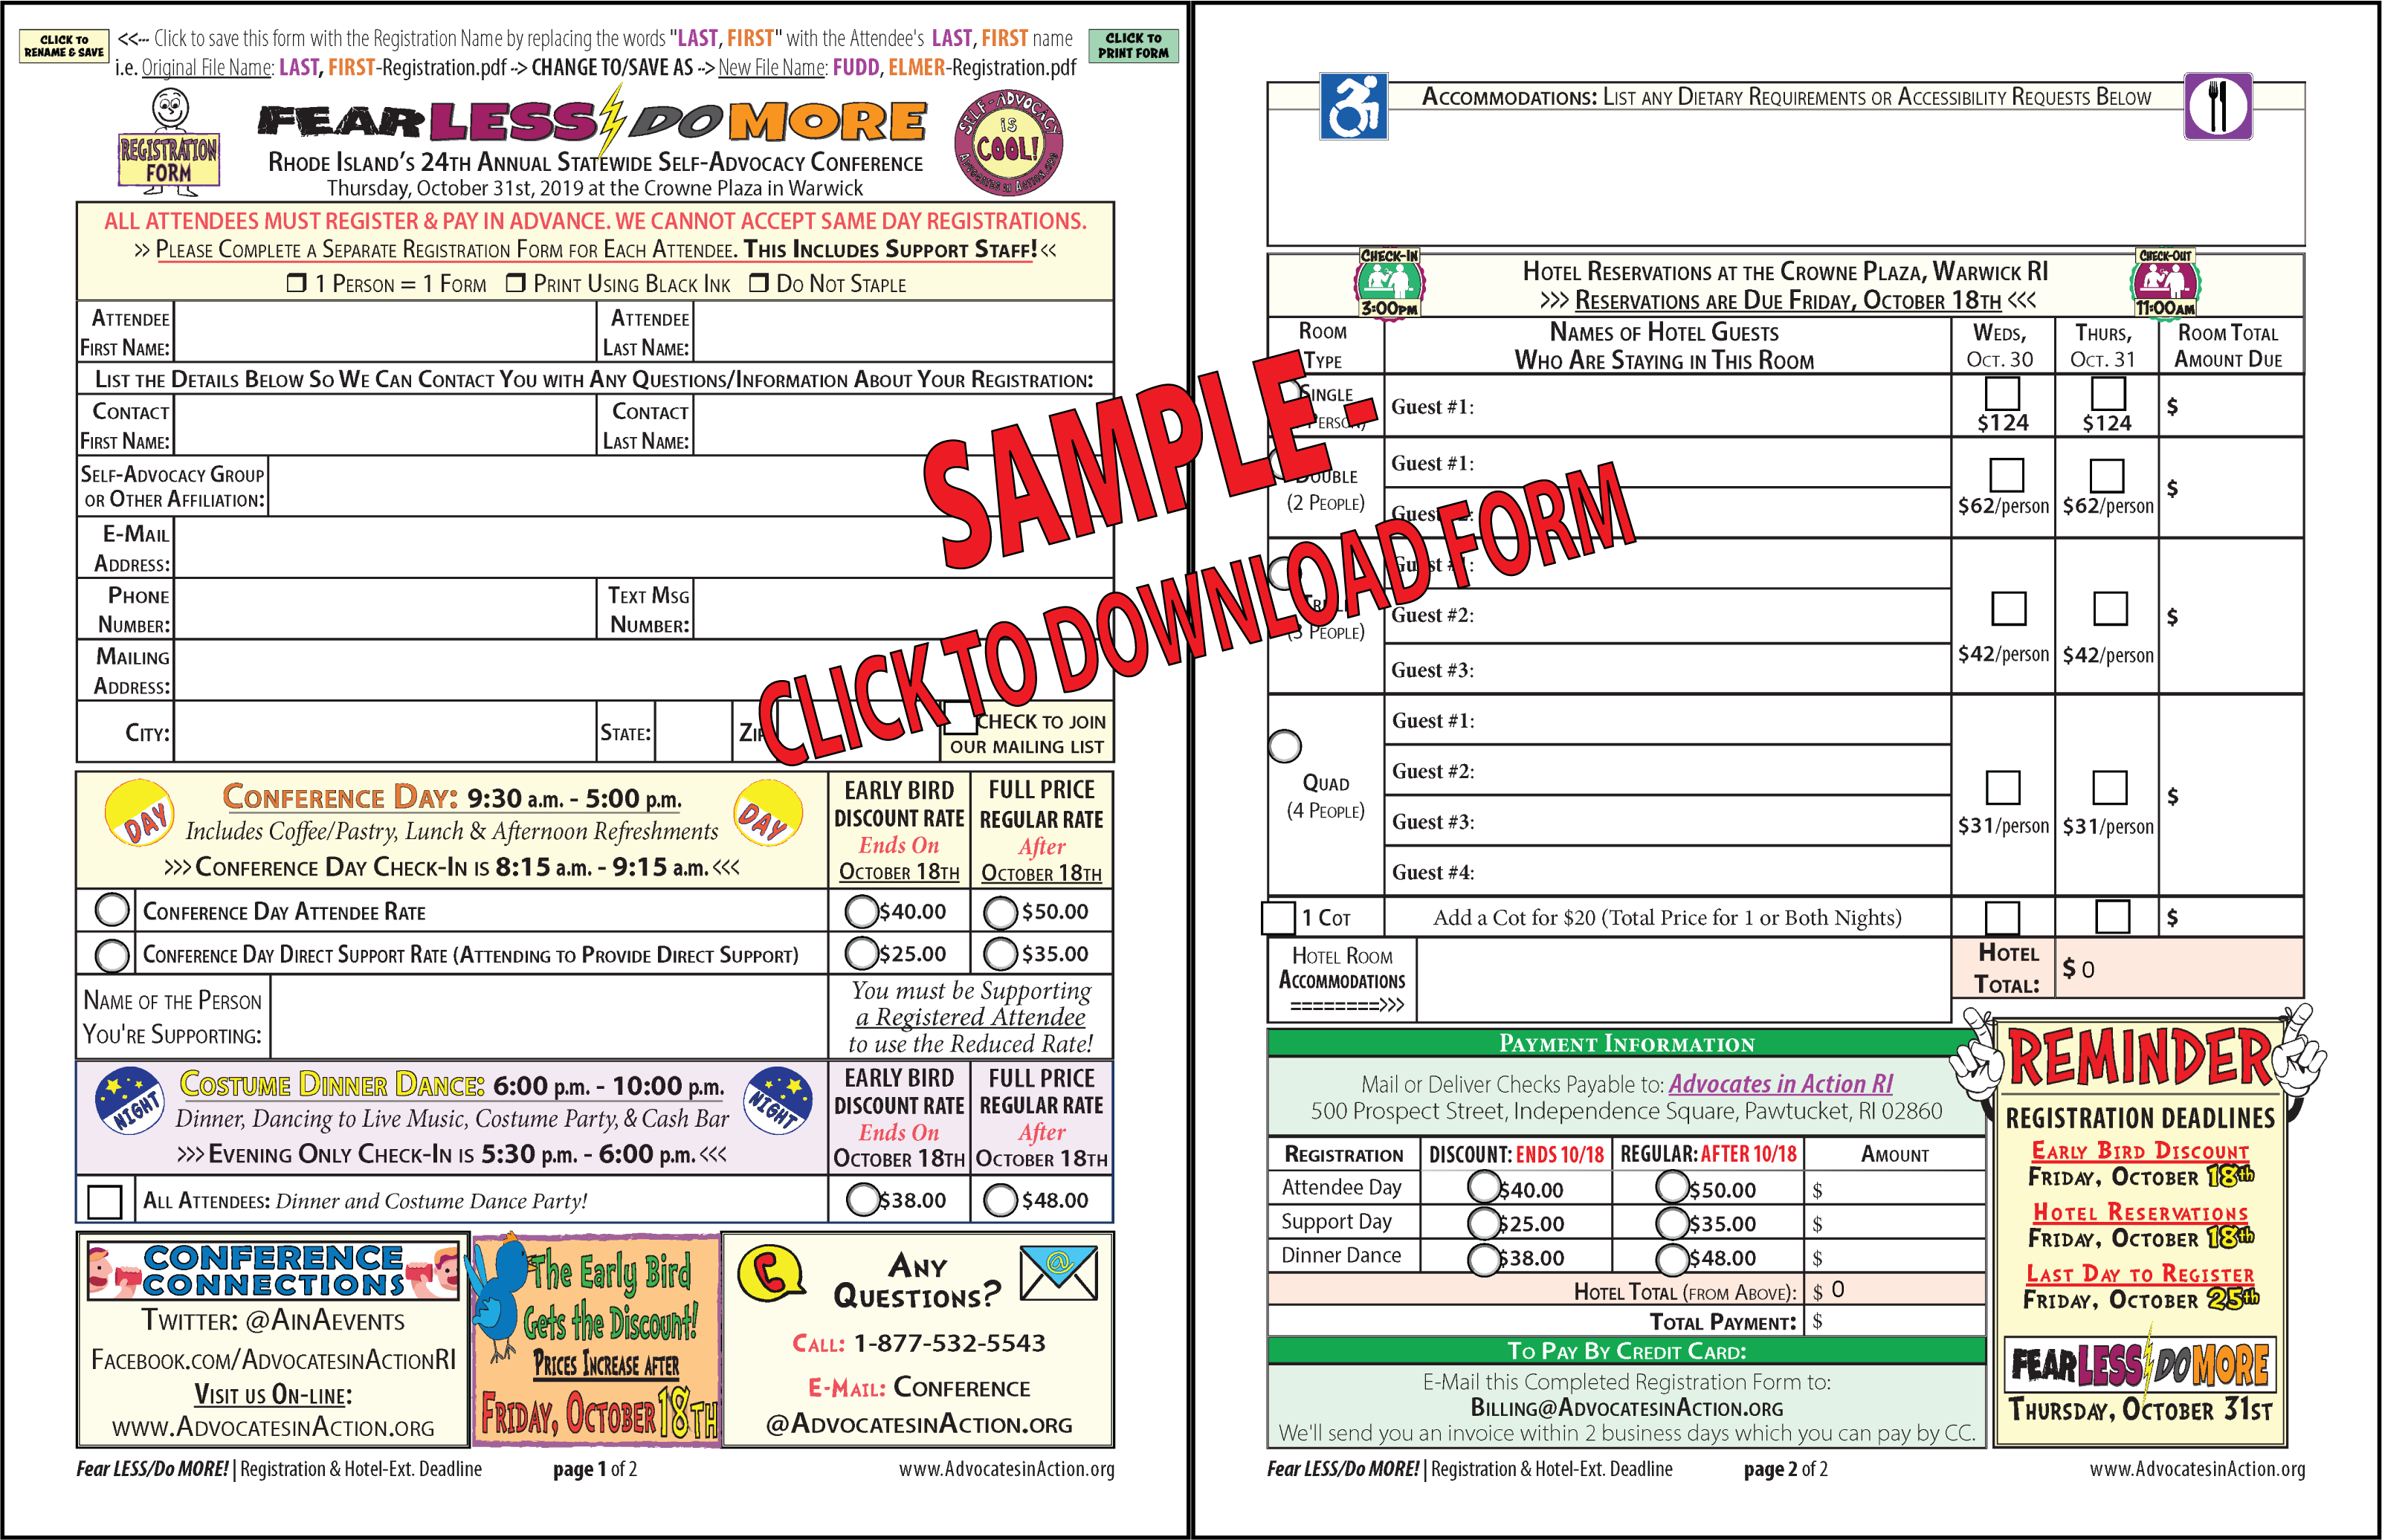 image of 2 page registraton form